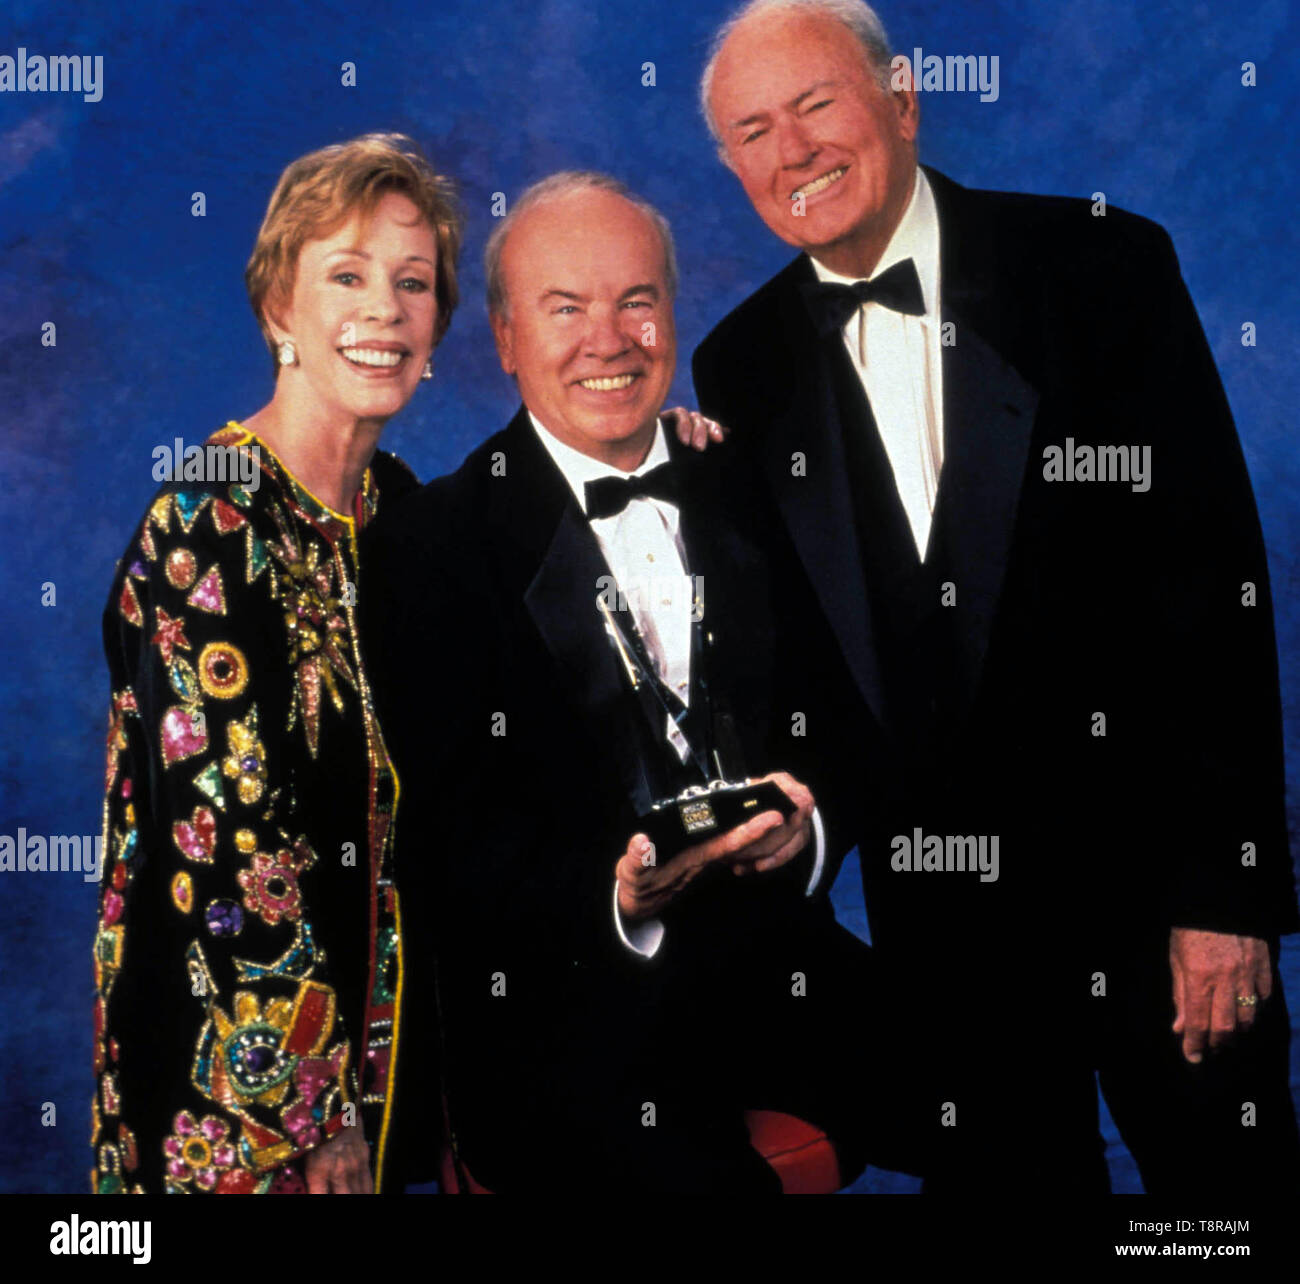 May 14, 2019: Los Angeles, California USA: FILE: Actor and comedian TIM CONWAY, best known for his Emmy winning work on 'The Carol Burnett Show,' died on Tuesday morning. He was 85. PICTURED: CAROL BURNETT, TIM CONWAY and HARVEY KORMAN at the American Comedy Awards, circa 1990's. (Credit Image: © Globe Photos/ZUMAPRESS.com) Stock Photo